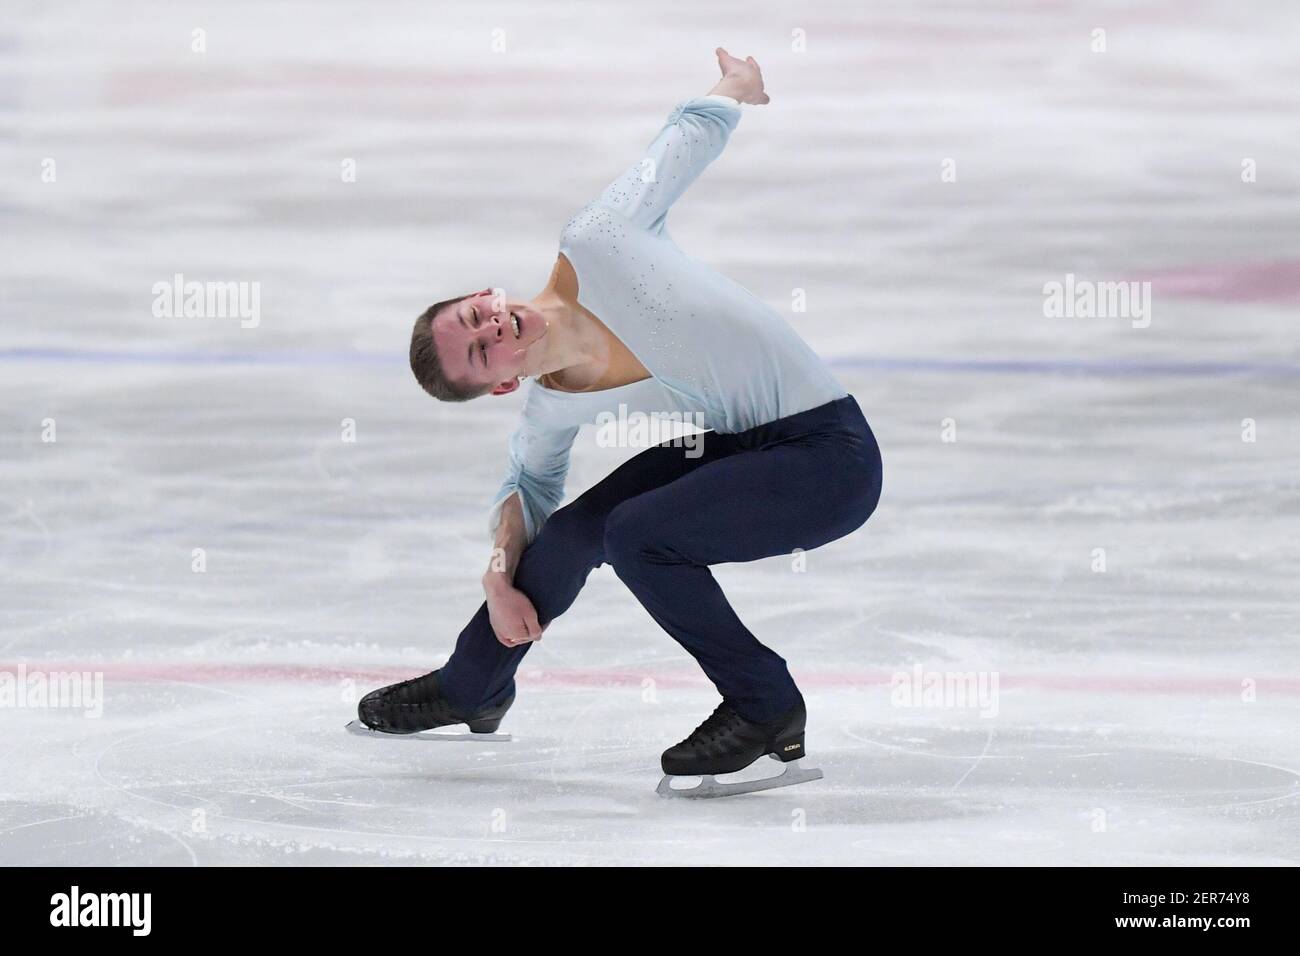 THE HAGUE, NETHERLANDS - FEBRUARY 28: Mikhall Kolyada of Russia competes in the figure skating men's free skate program on Day 4 during the Challenge Stock Photo